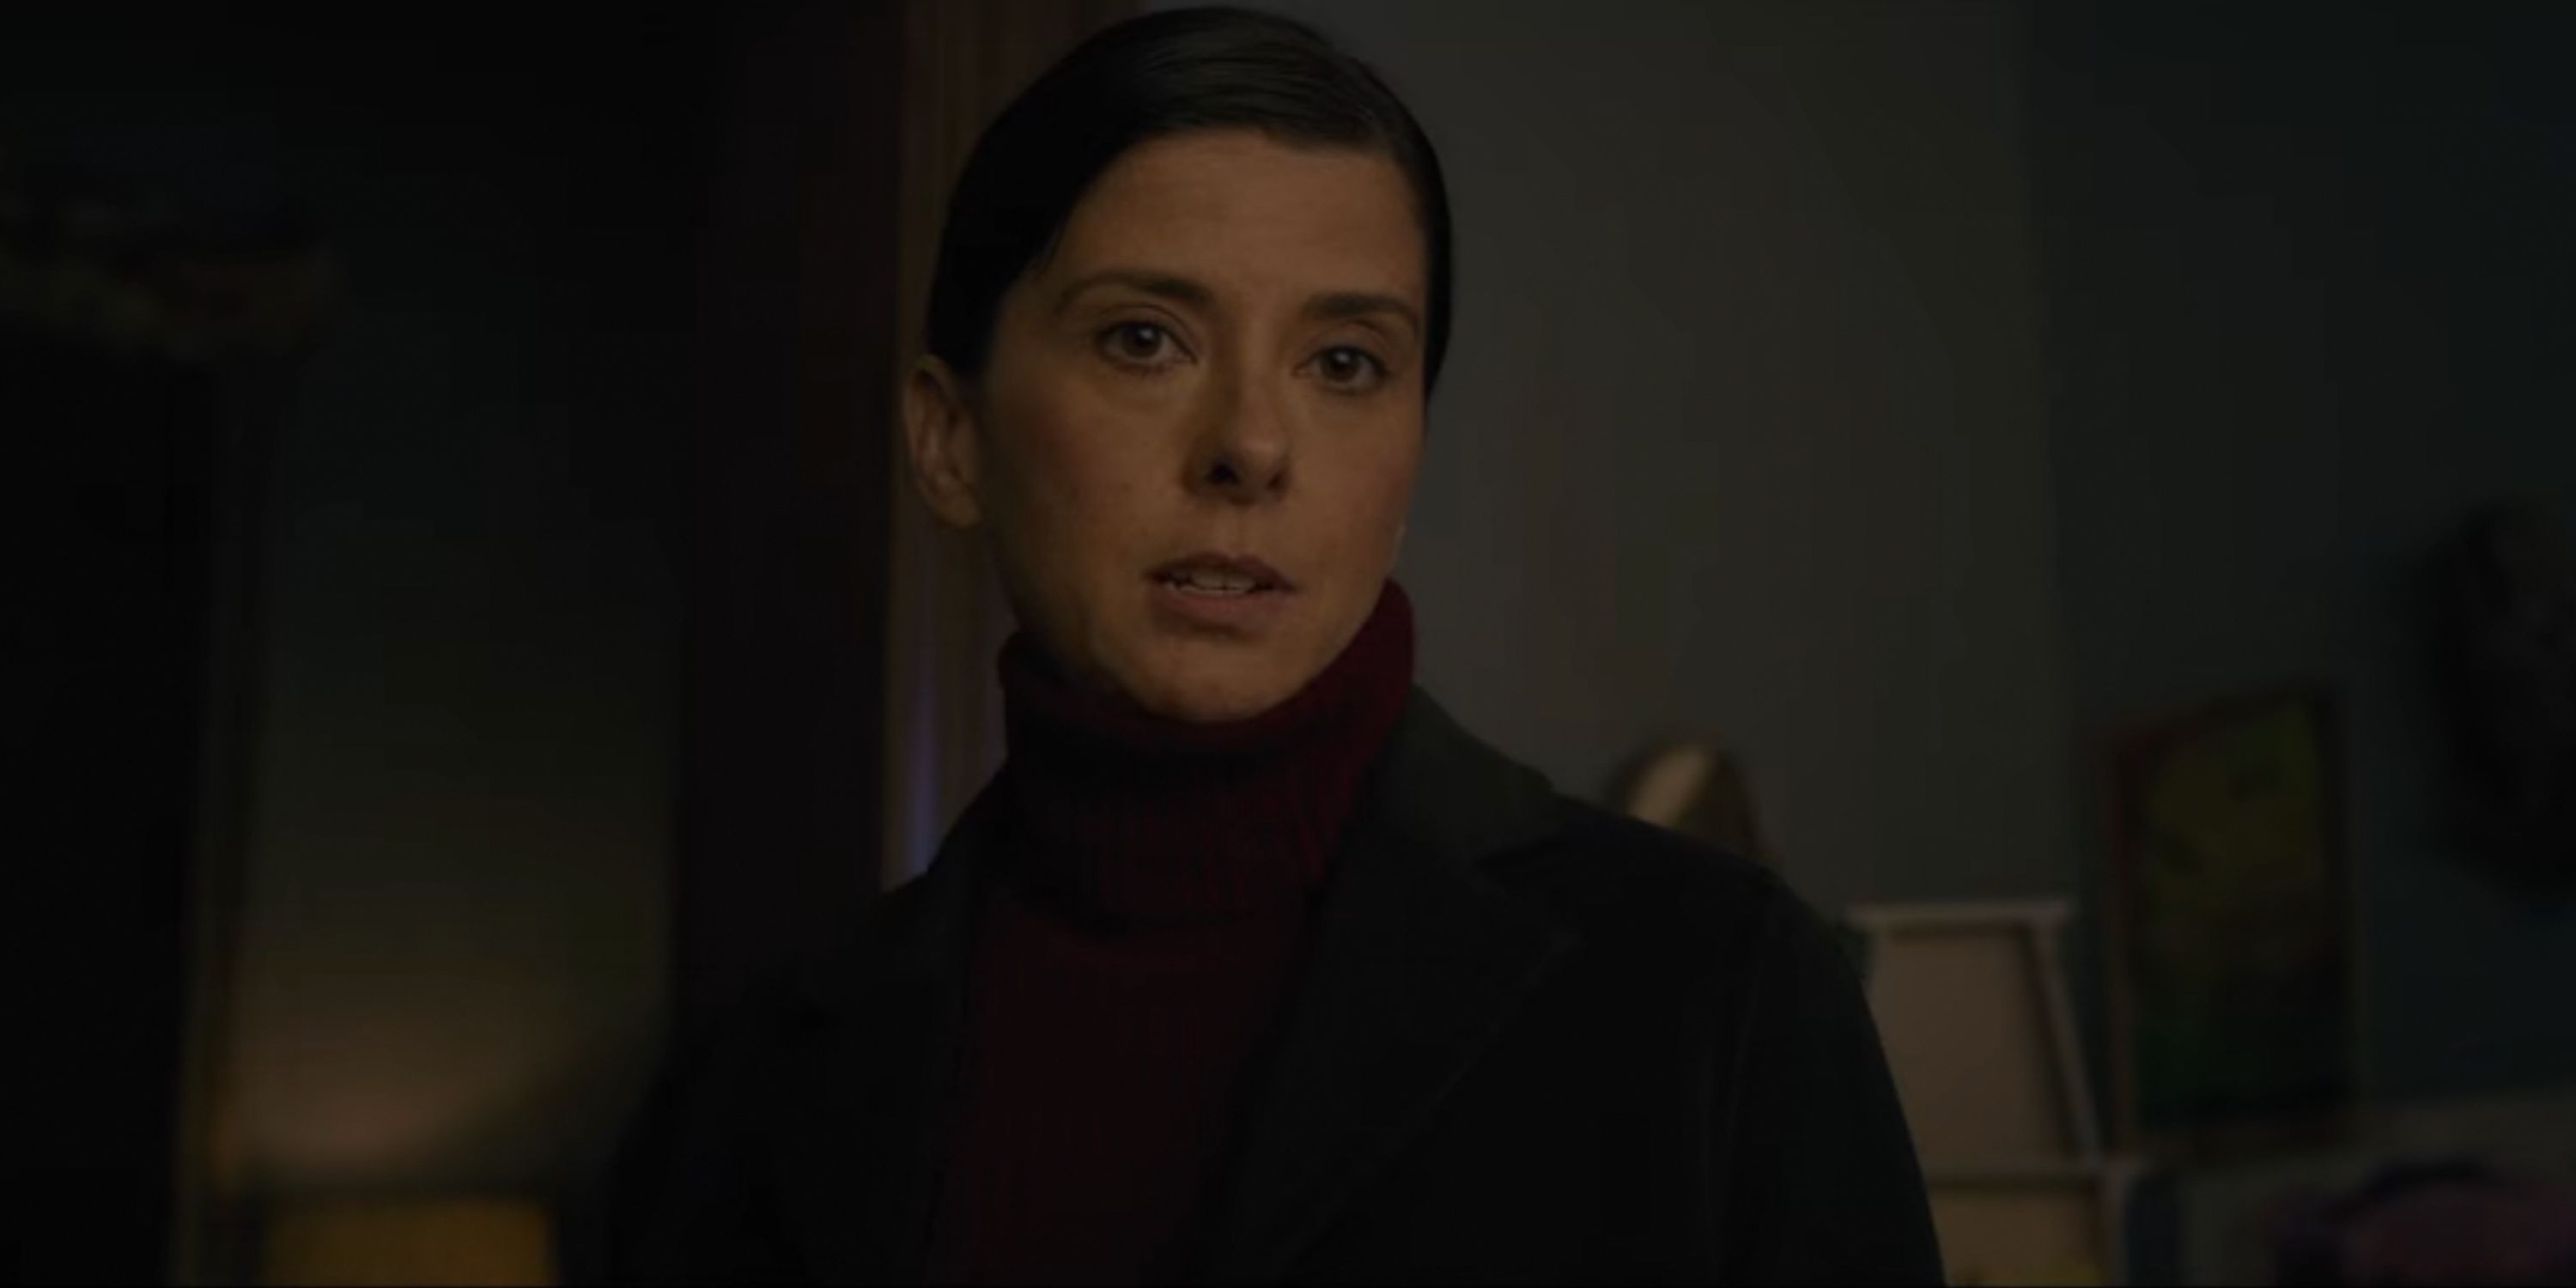 Jeanine Serralles as Detective Norelli in The Woman in the Window on Netflix